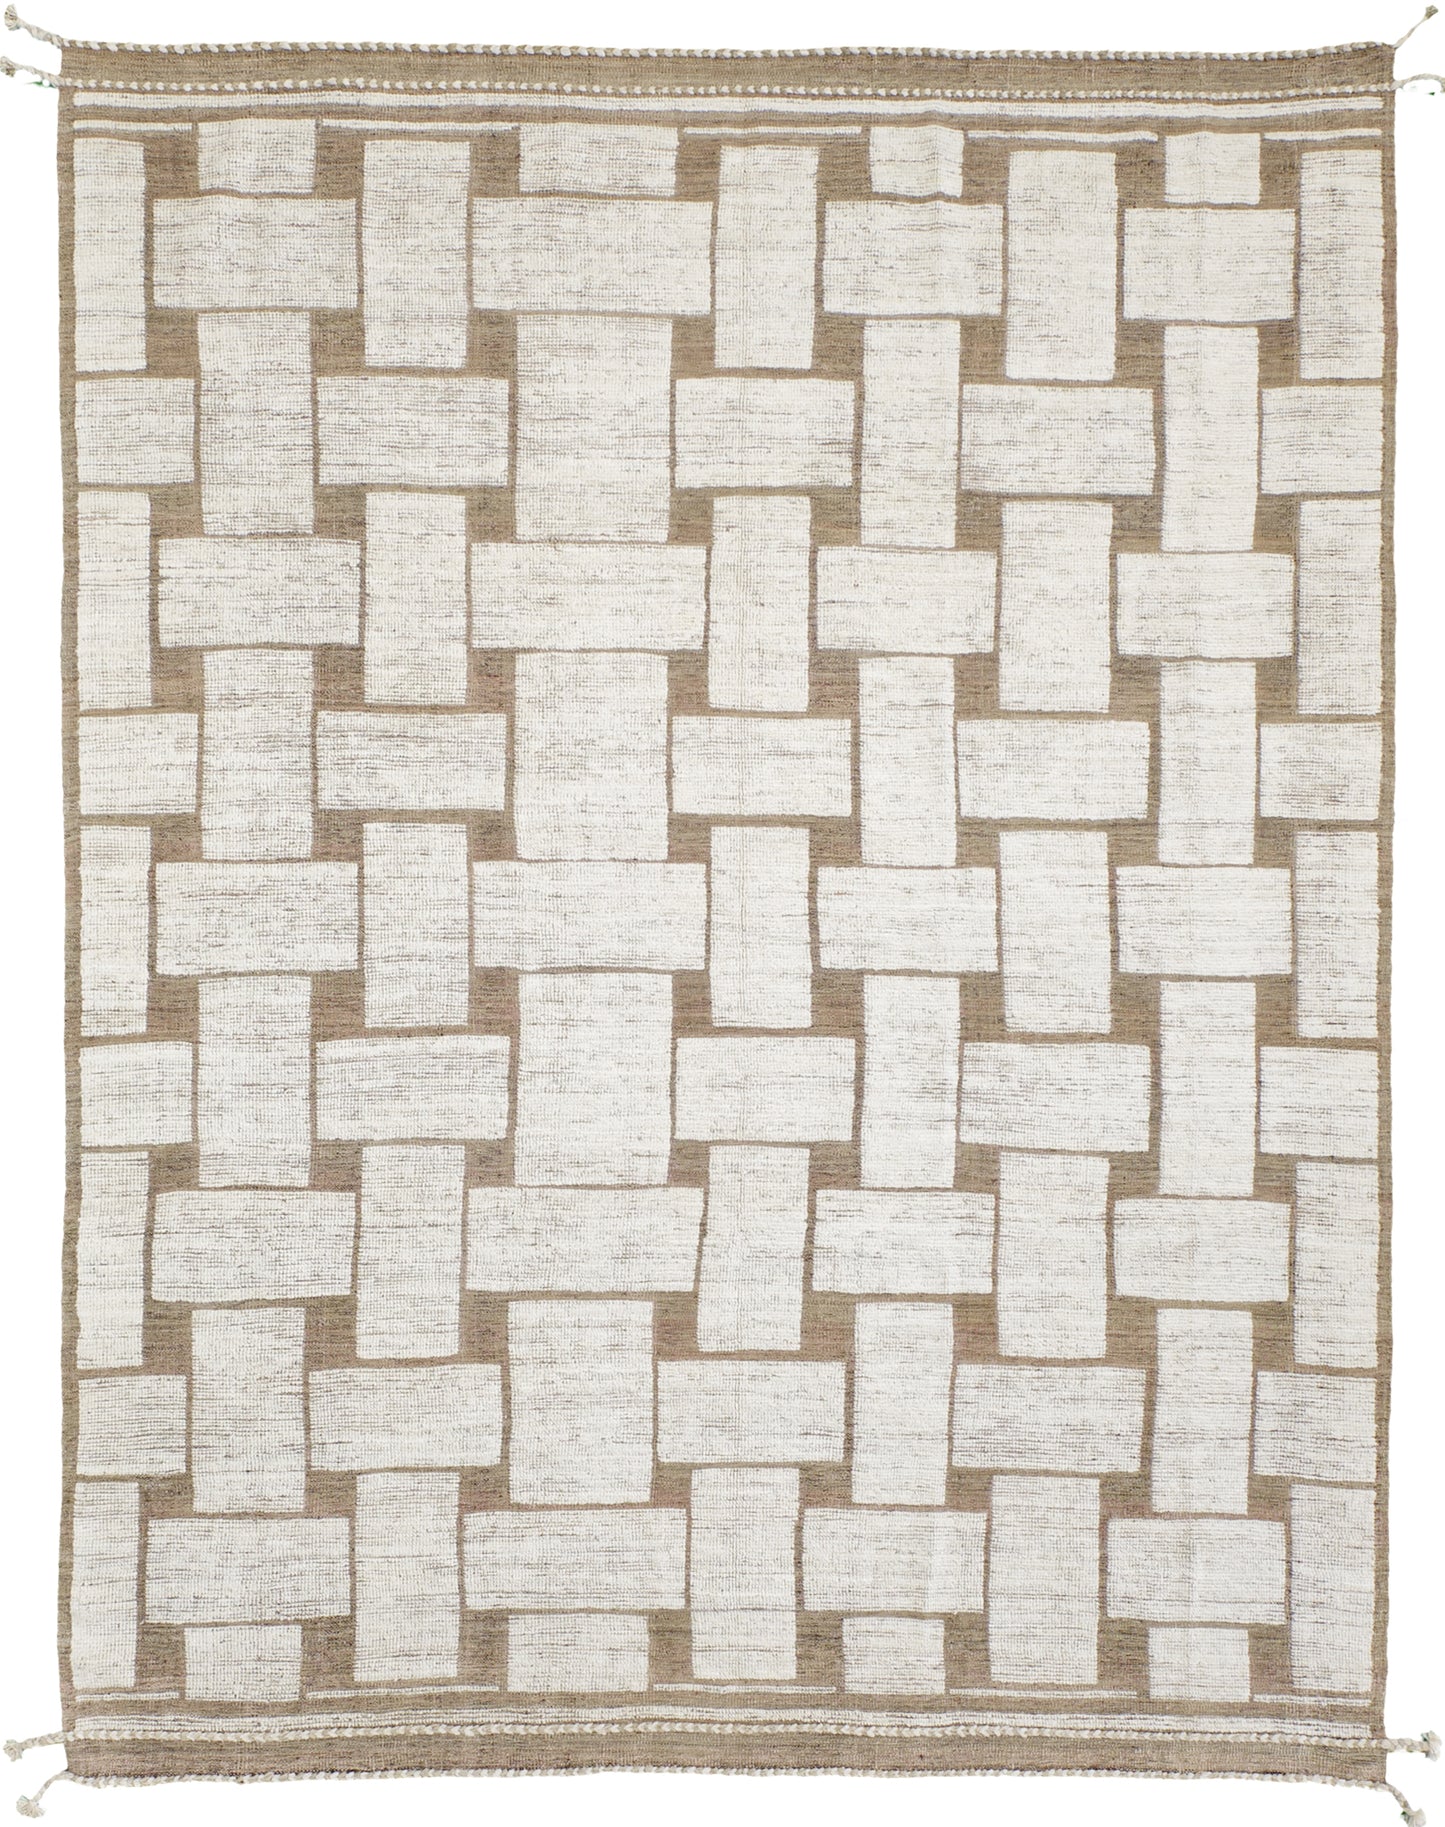 Modern Rug Image 10752 Souani, Nomad Collection